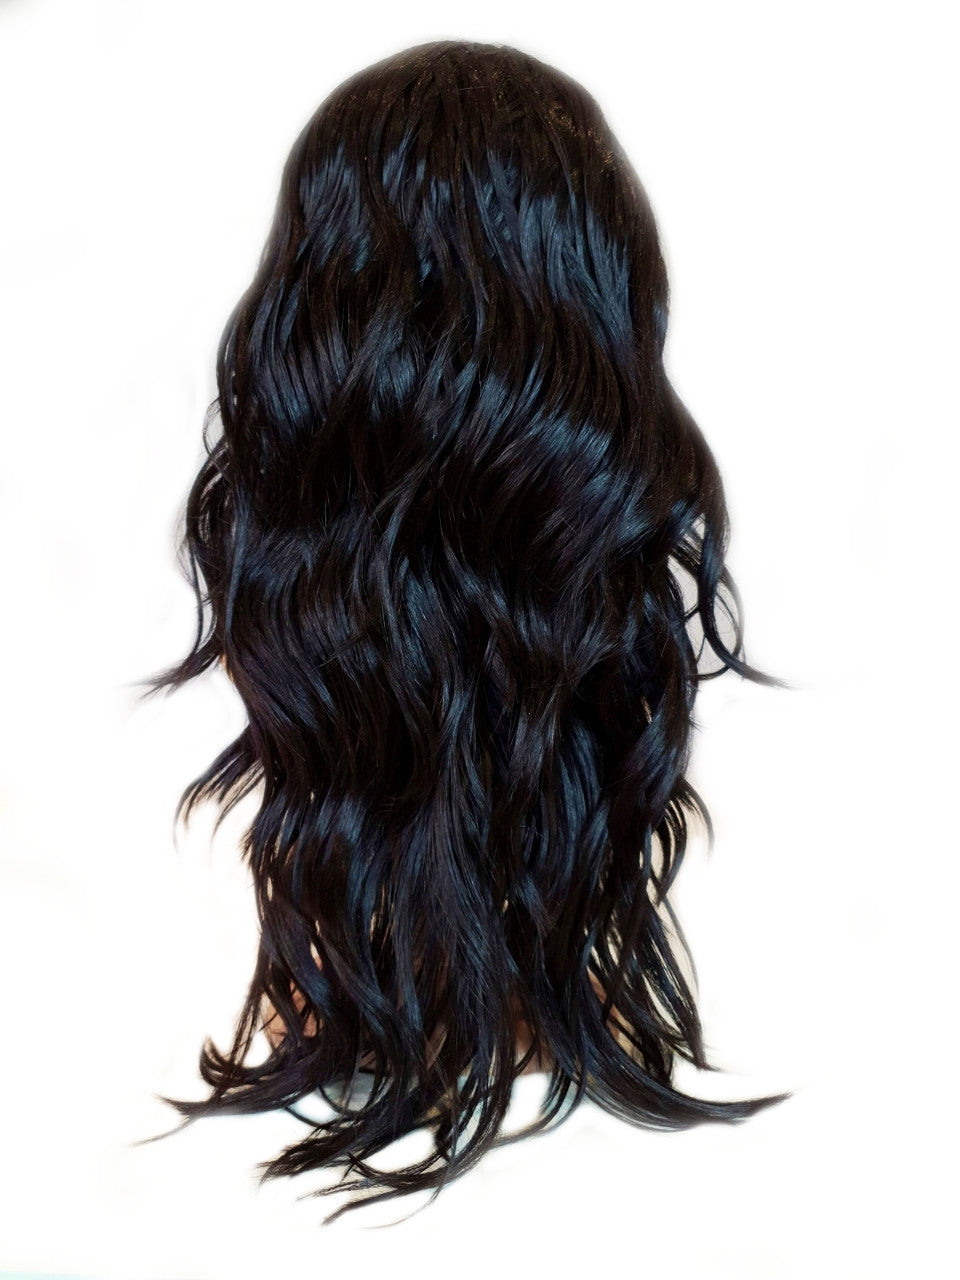 Black Lace Front long wavy texture wig.